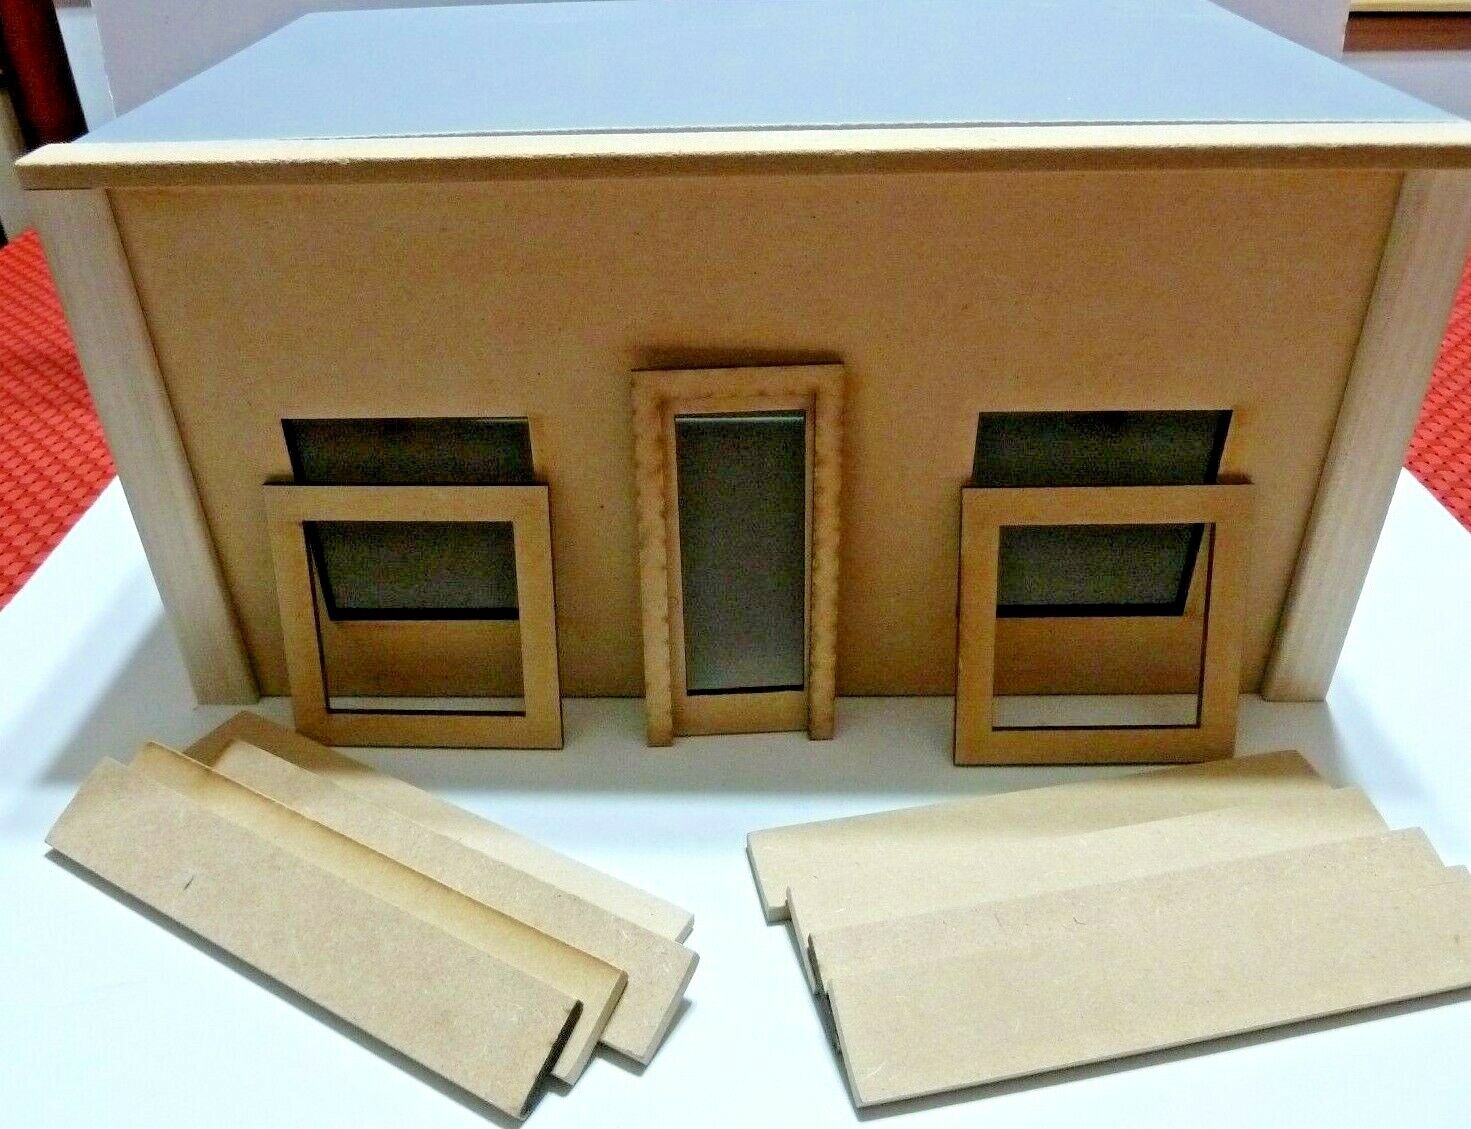 New-Vintage-Style Model Used car Dealership  Diorama 1/64 scale